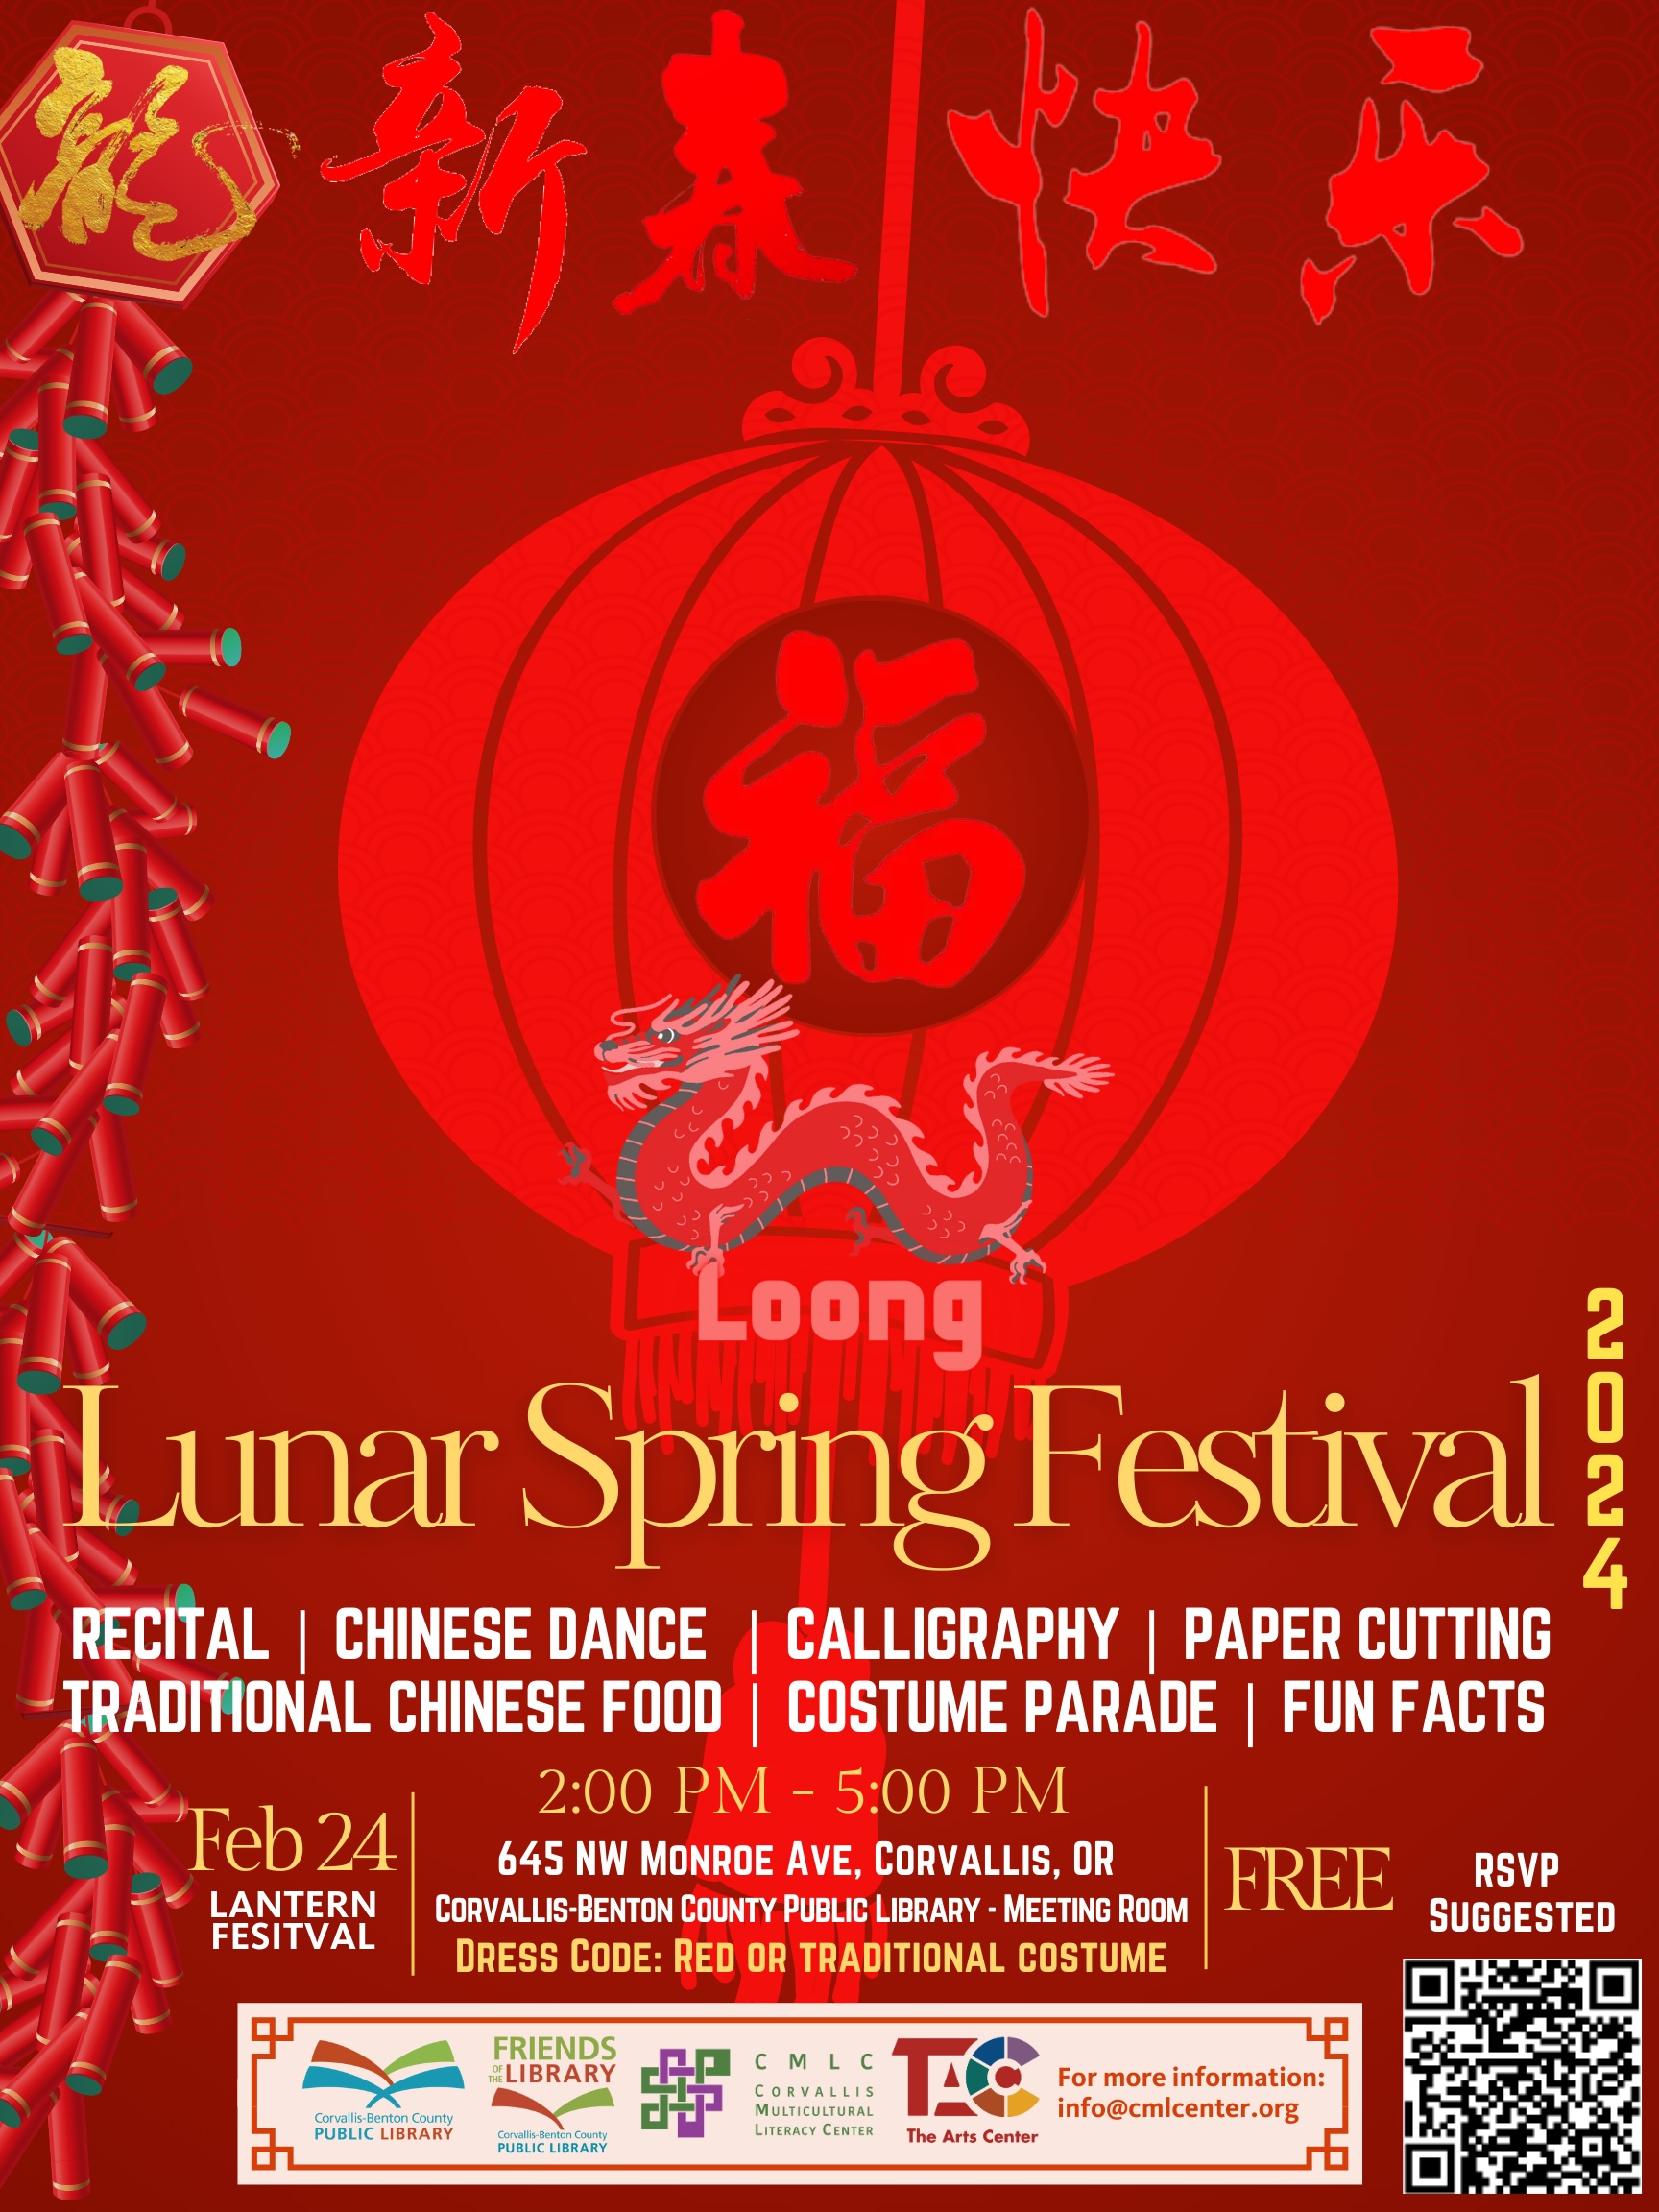 Red flyer with red lantern is advertisement for Lunar Spring Festival